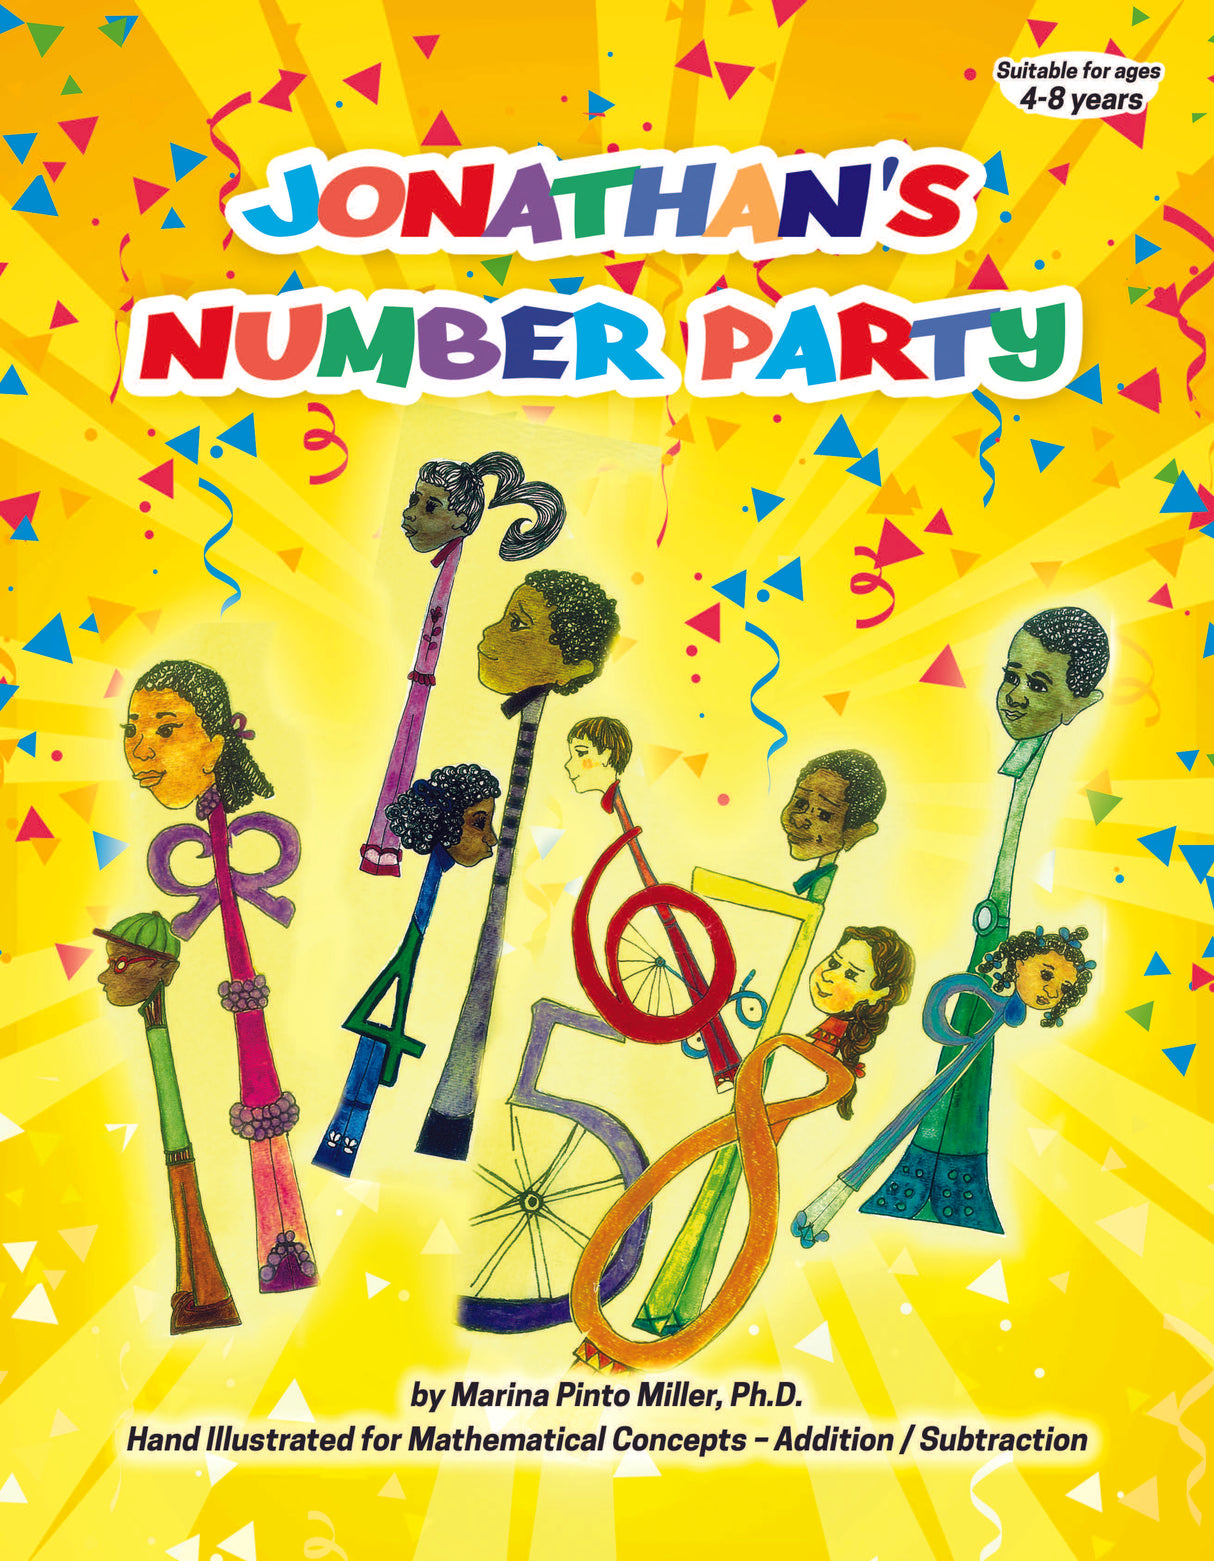 Jonathan's Number Party